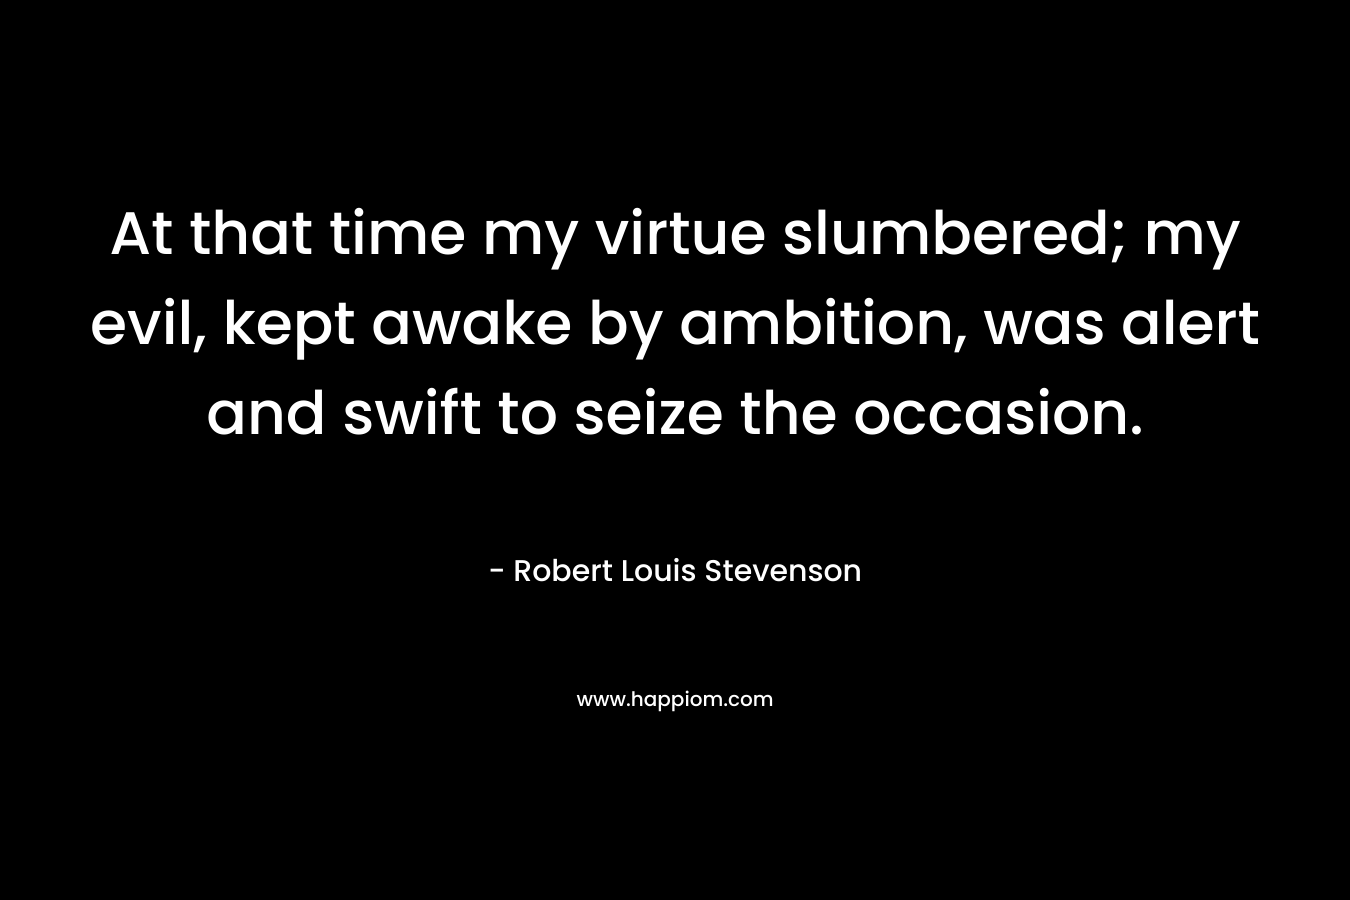 At that time my virtue slumbered; my evil, kept awake by ambition, was alert and swift to seize the occasion. – Robert Louis Stevenson